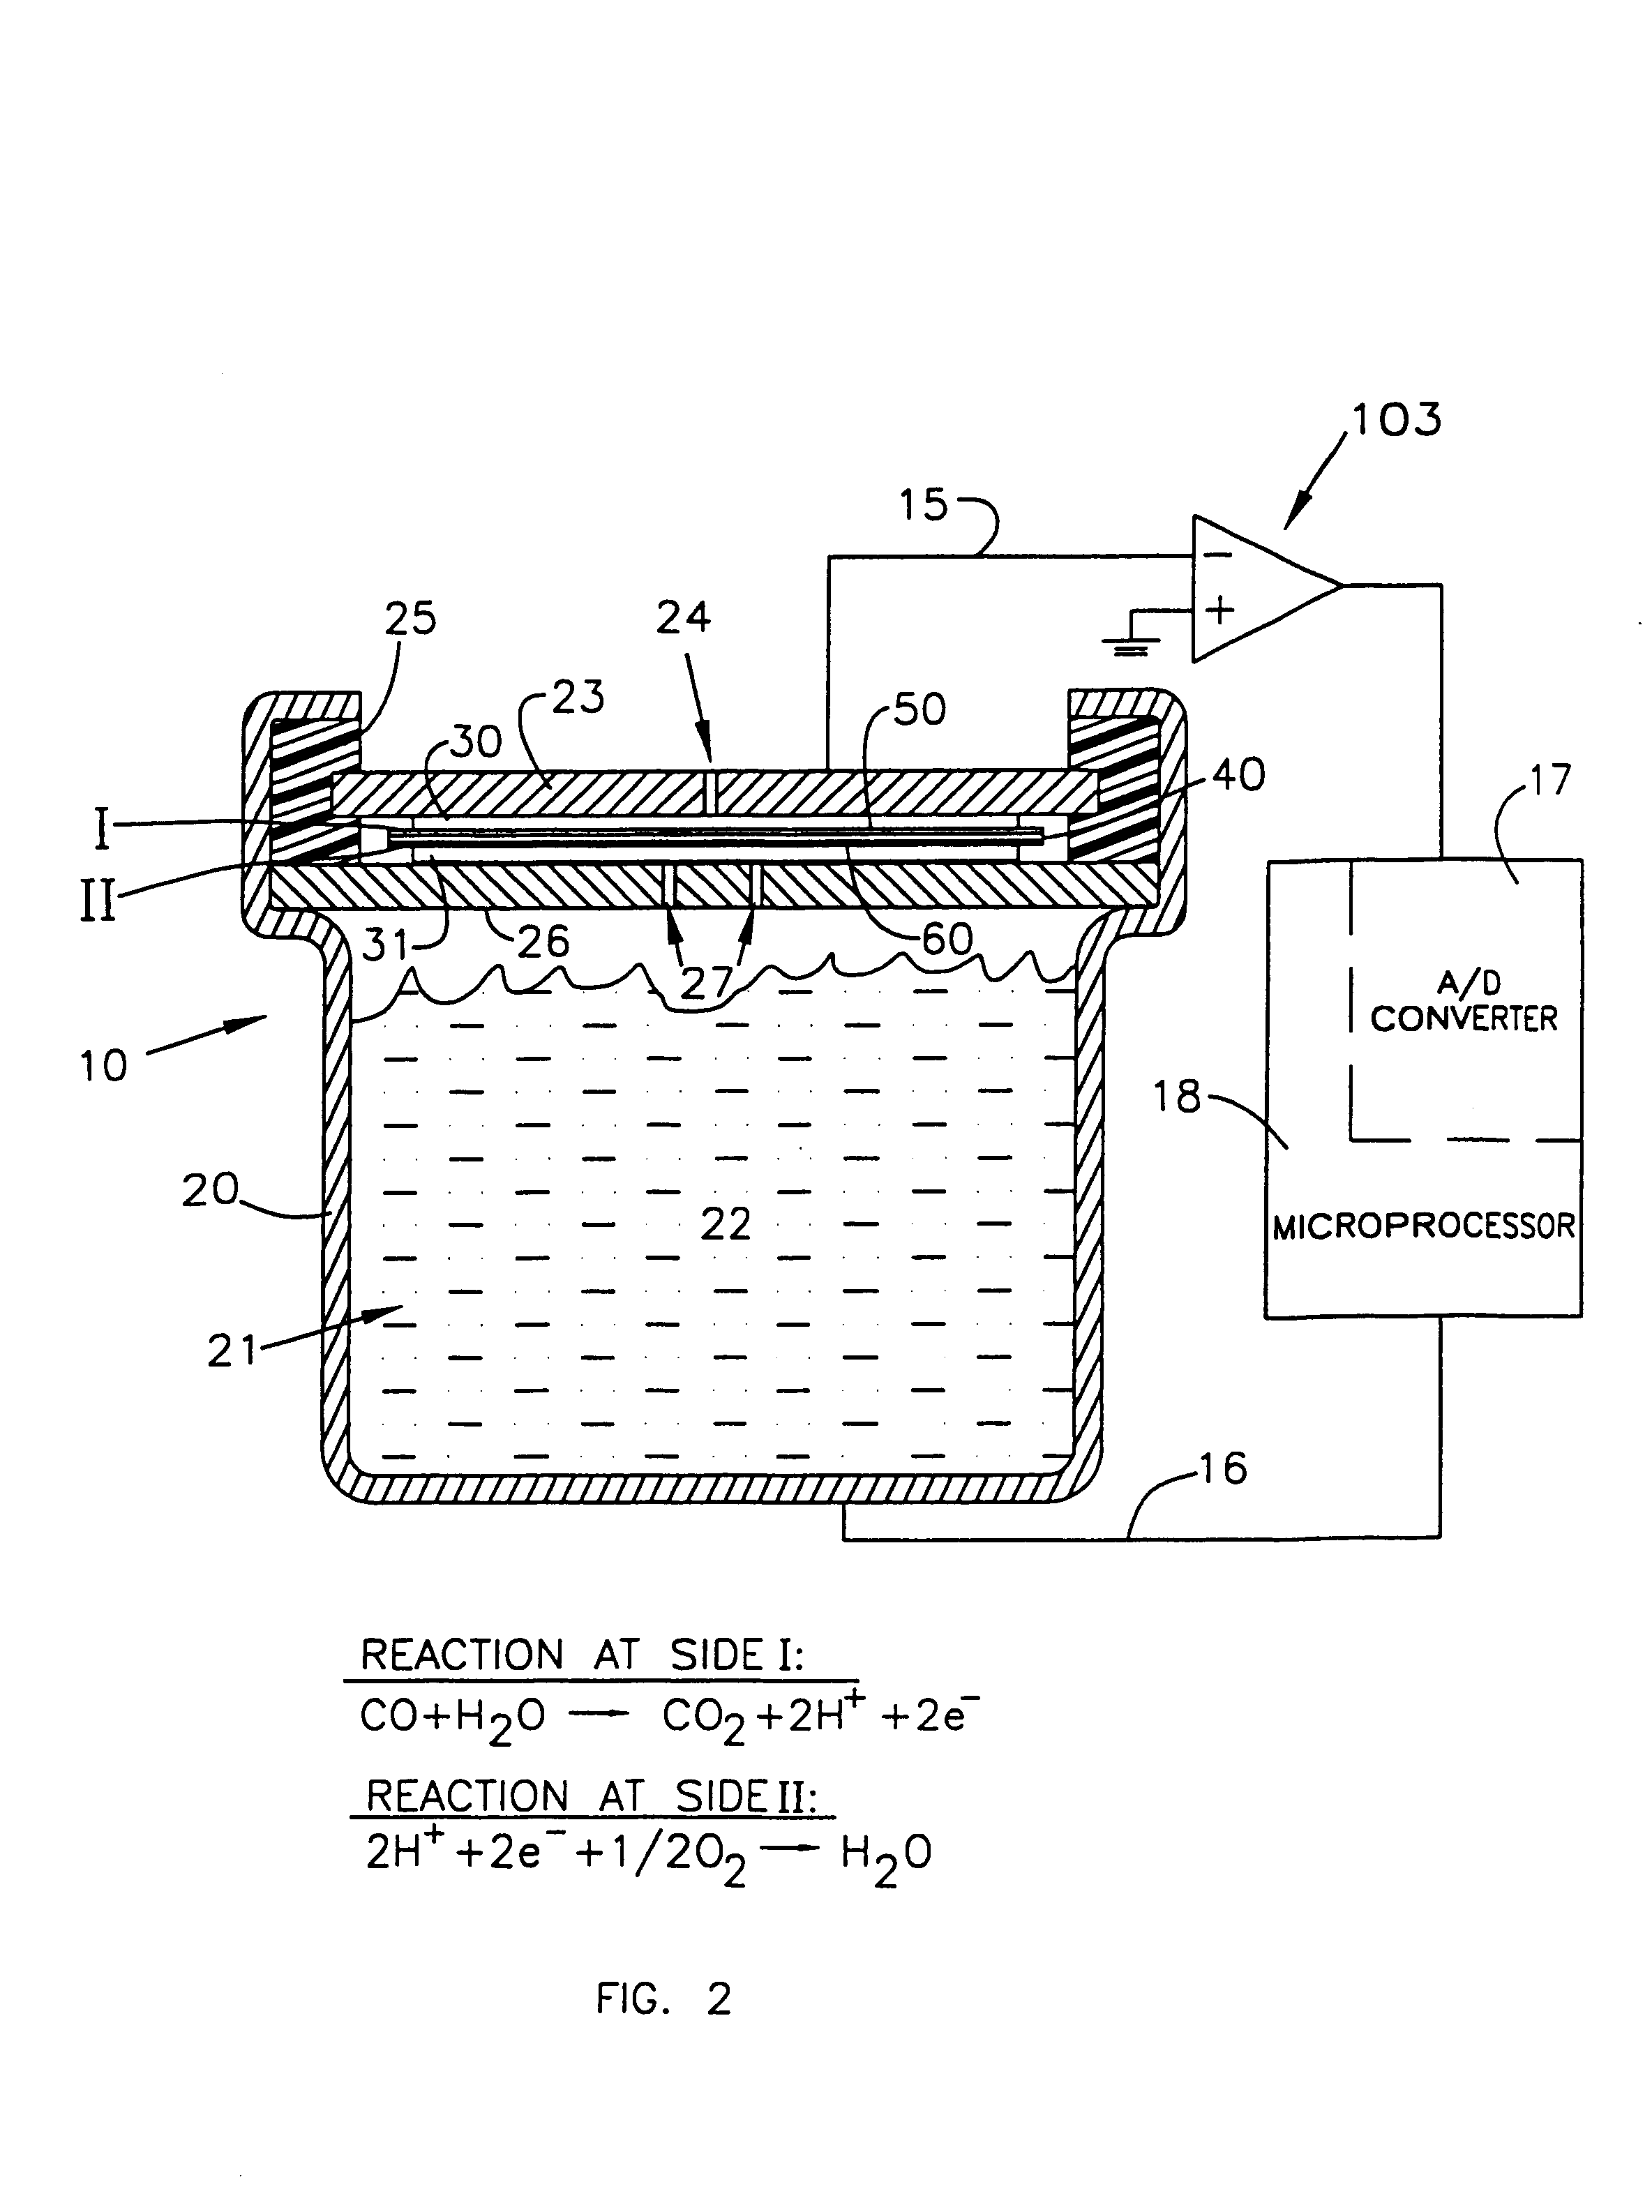 Gas sensor with electrically conductive, hydrophobic membranes